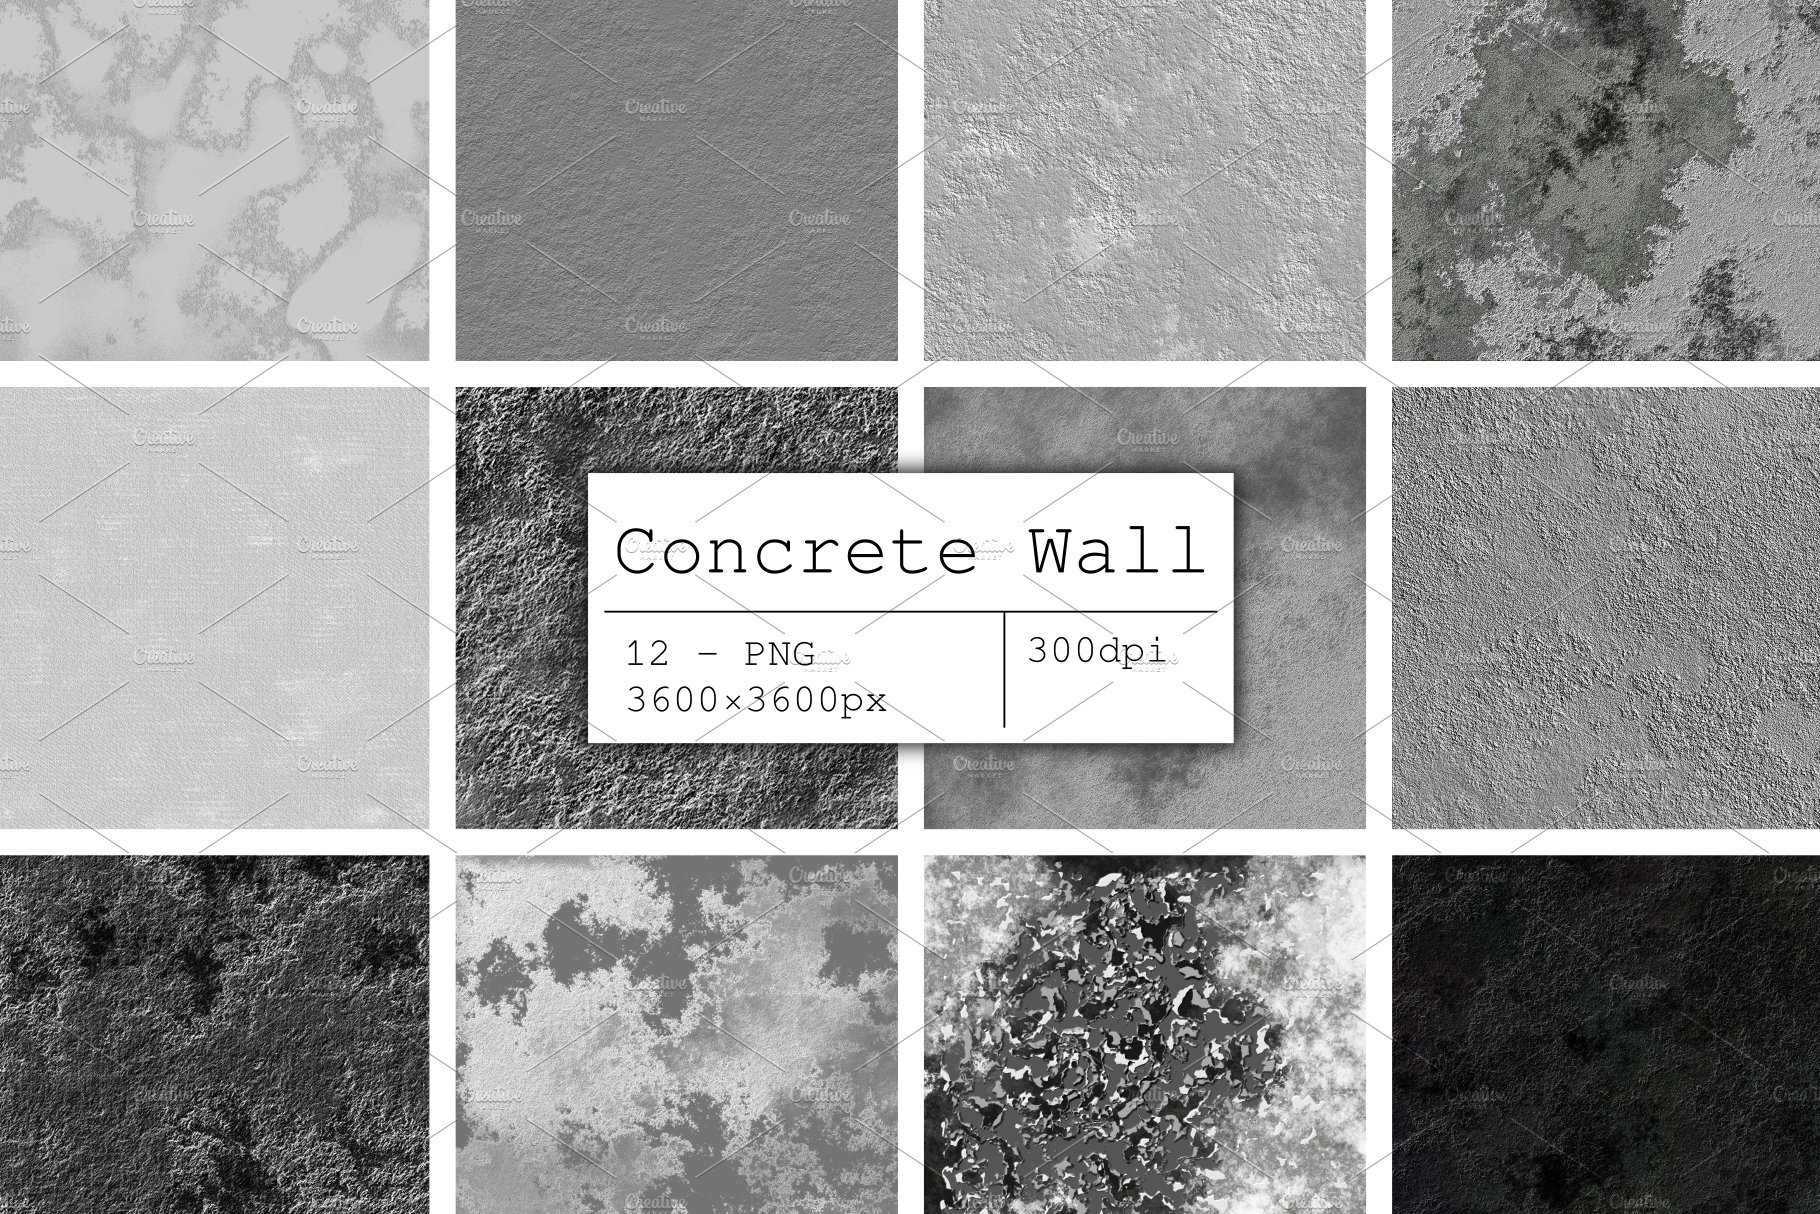 Concrete Wall cover image.